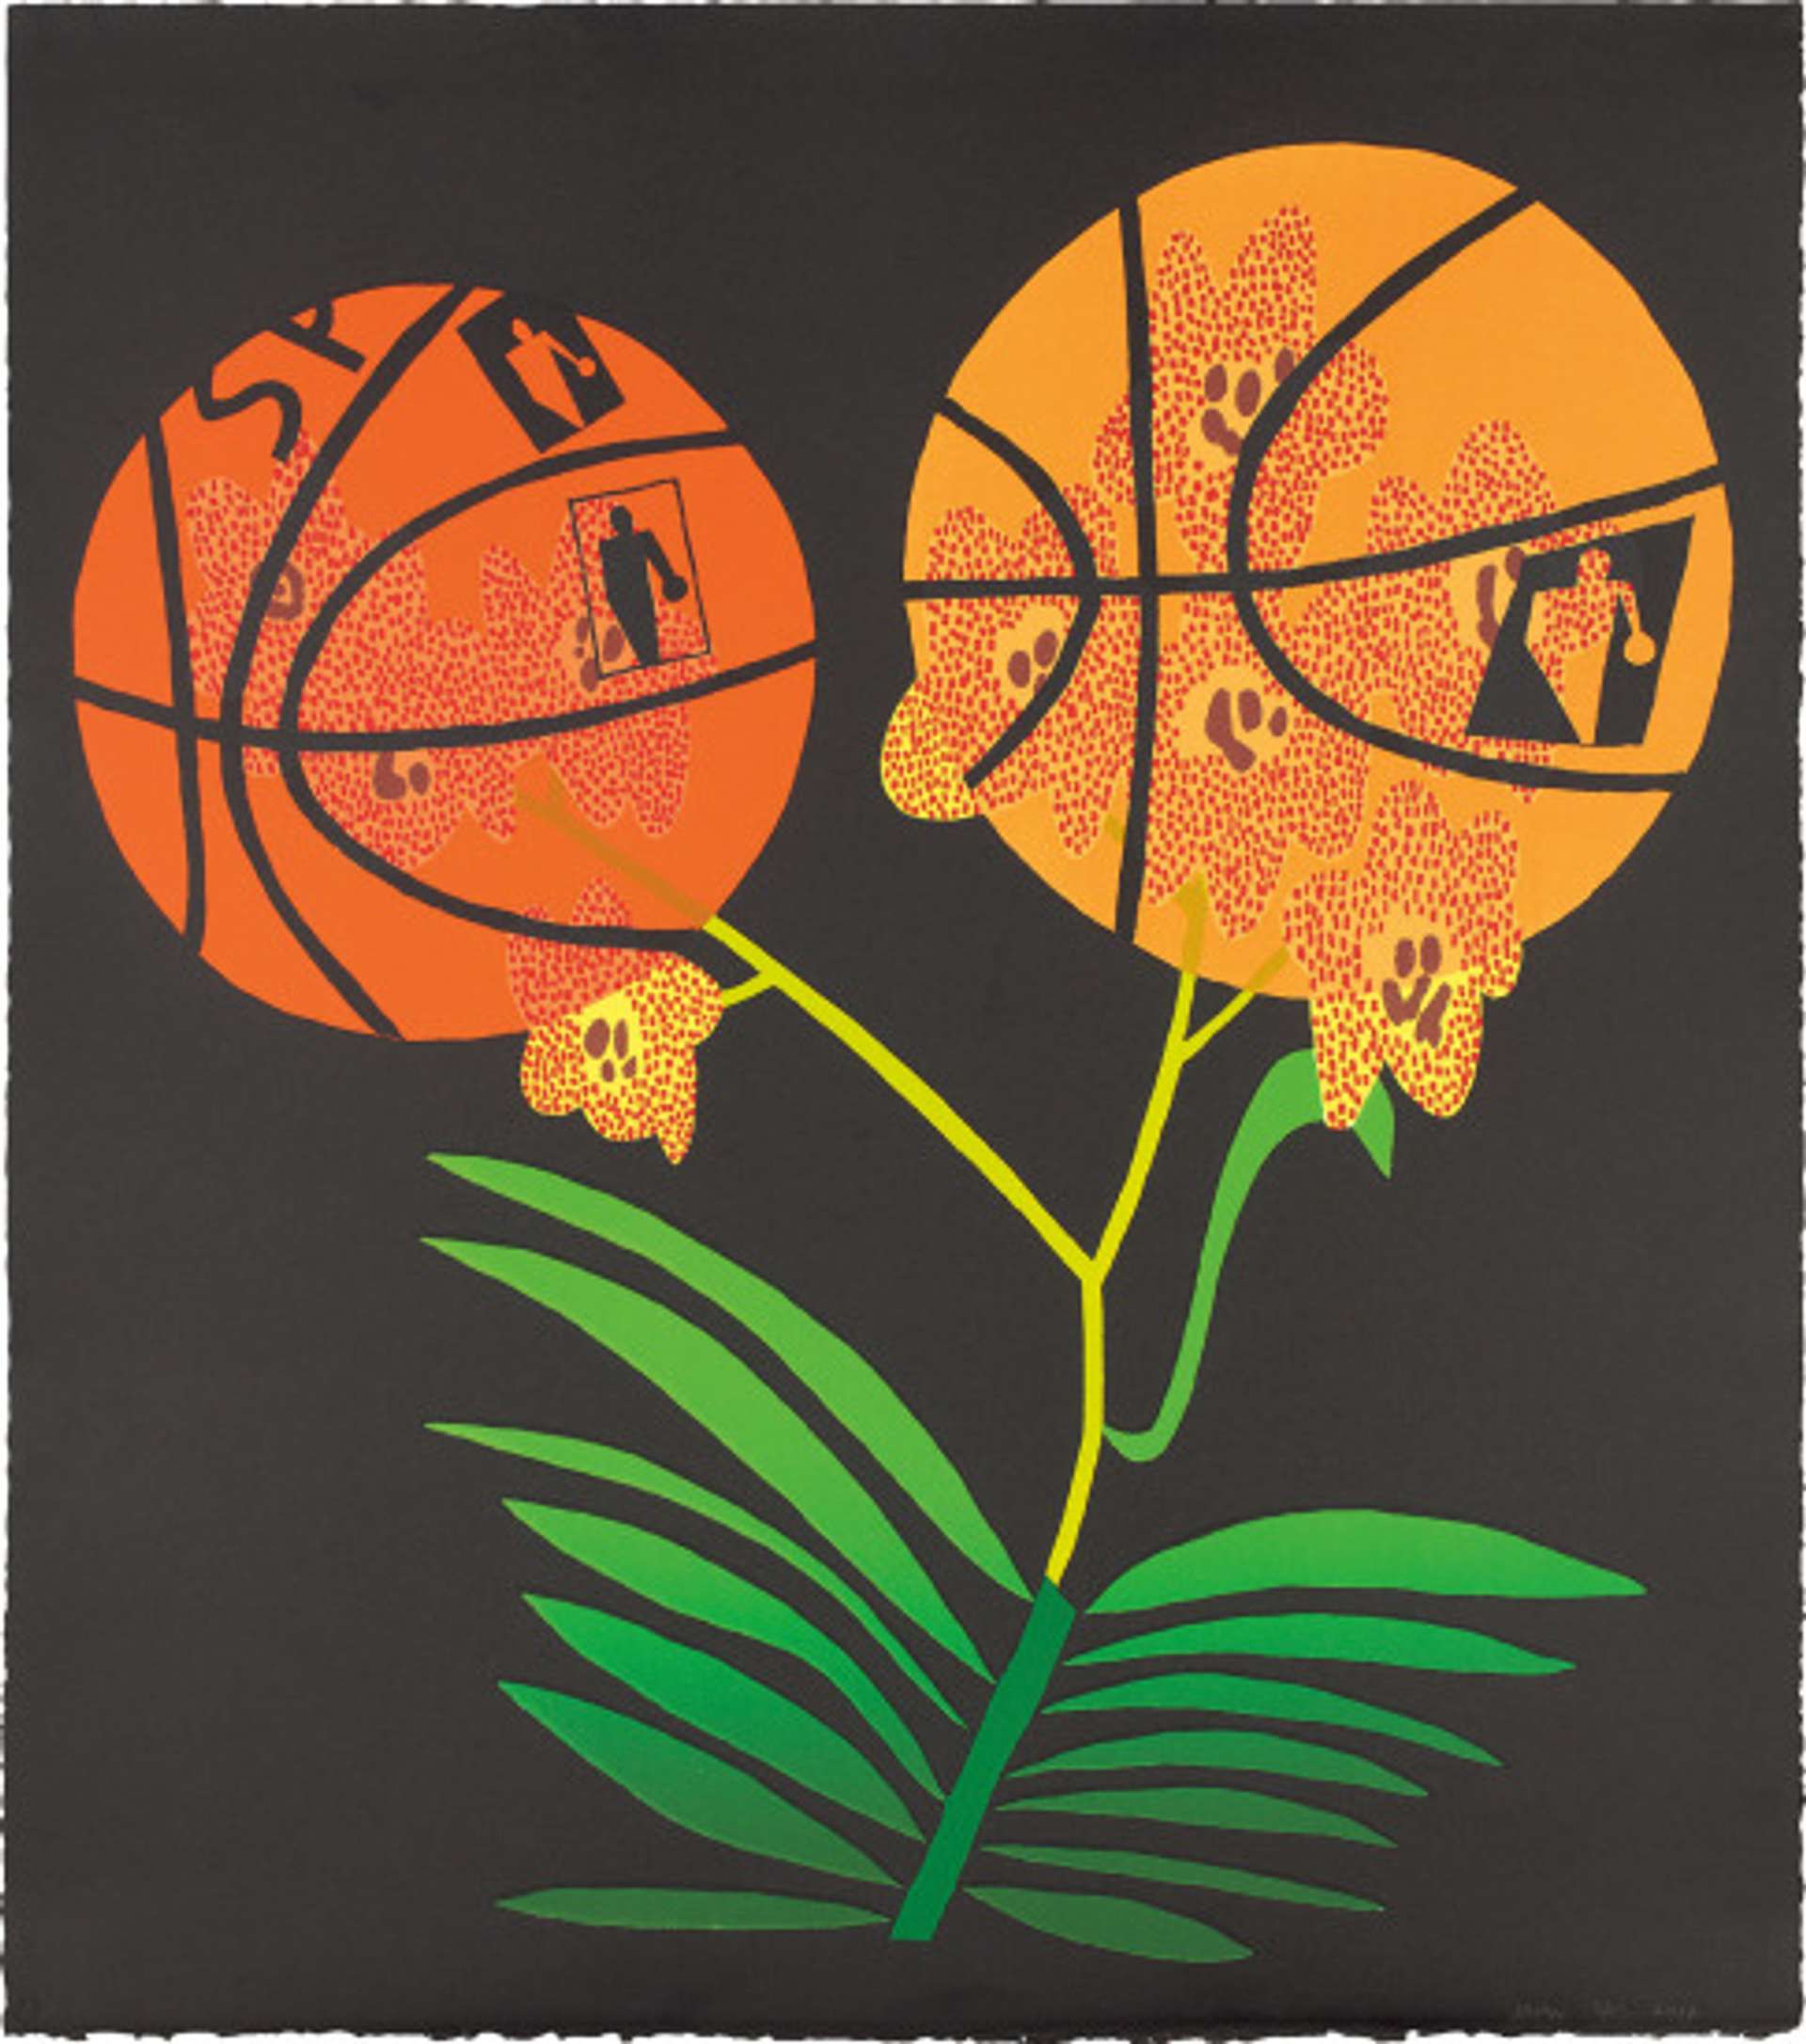 A green plant stem leads up to two orange basketballs, styled as flowers.